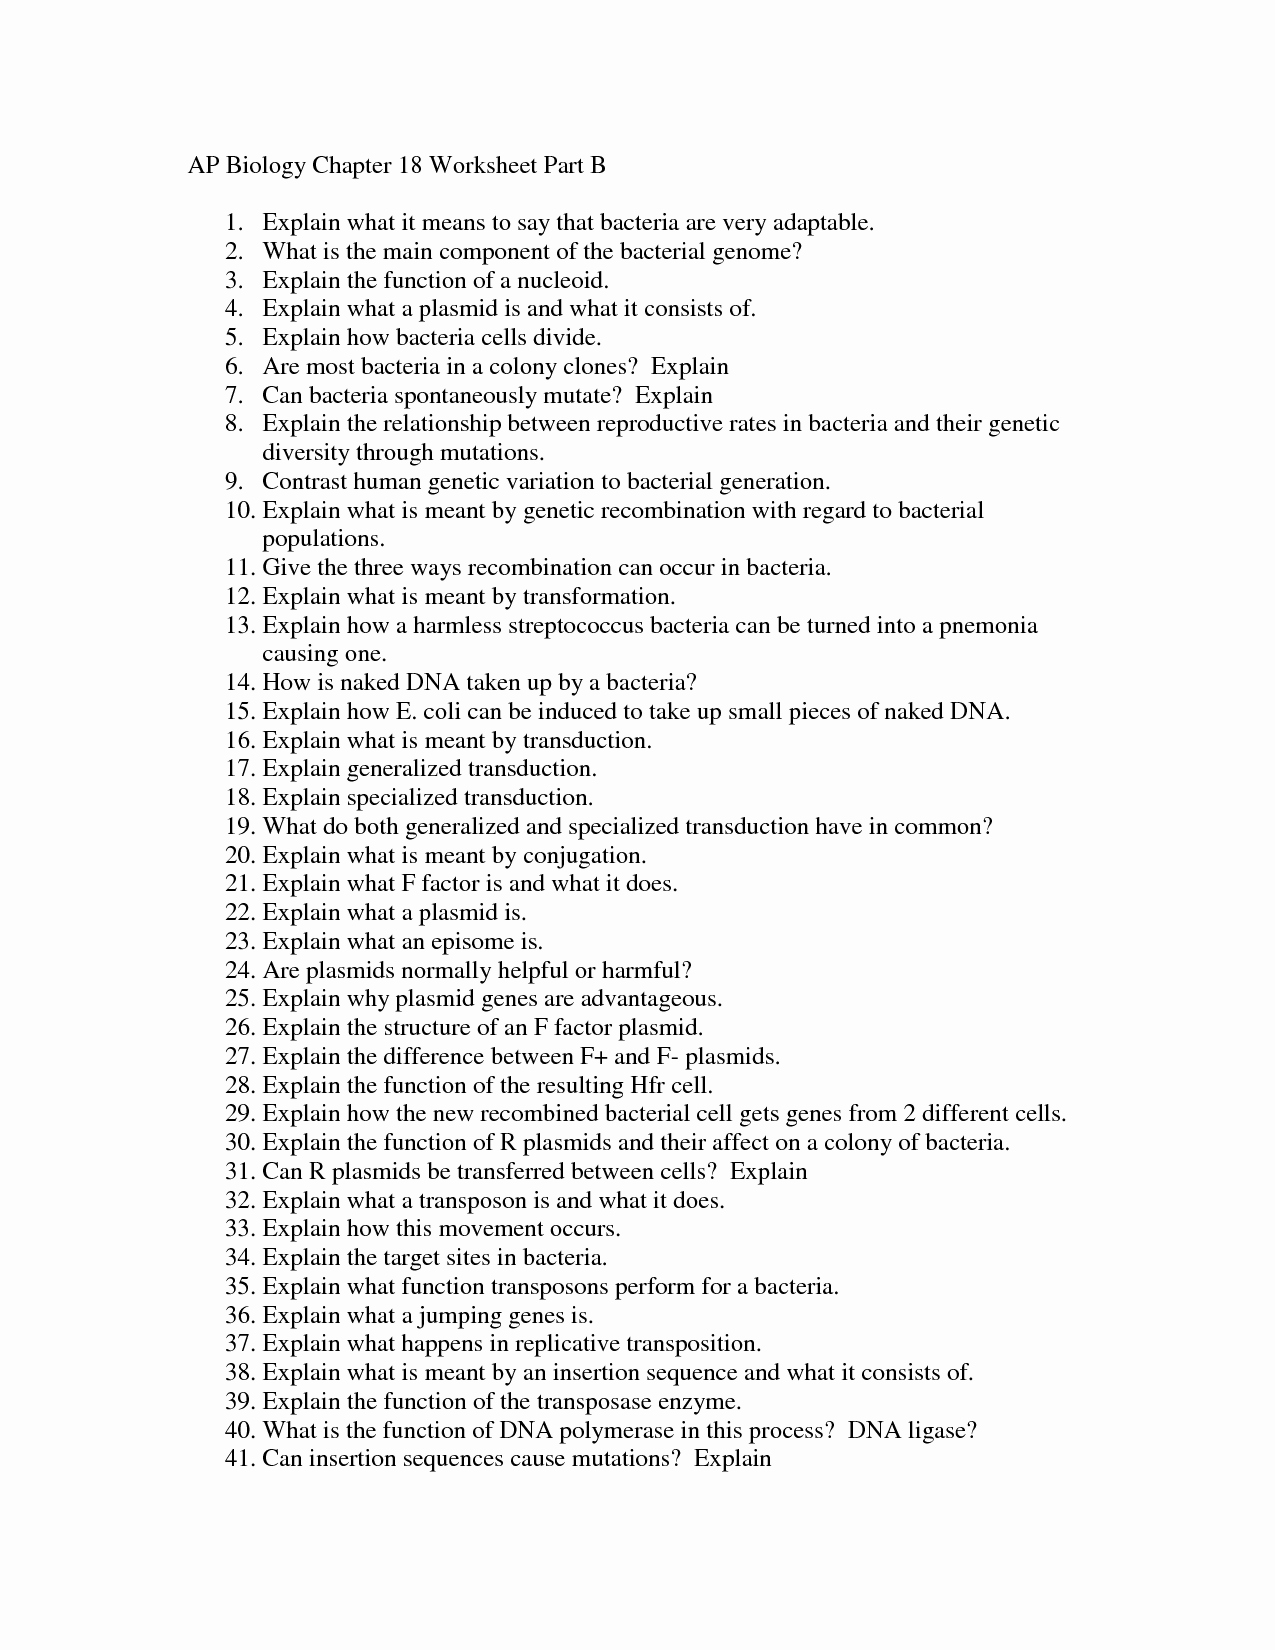 Dna Structure Worksheet Answer Beautiful 19 Best Of Dna Replication Structure Worksheet and